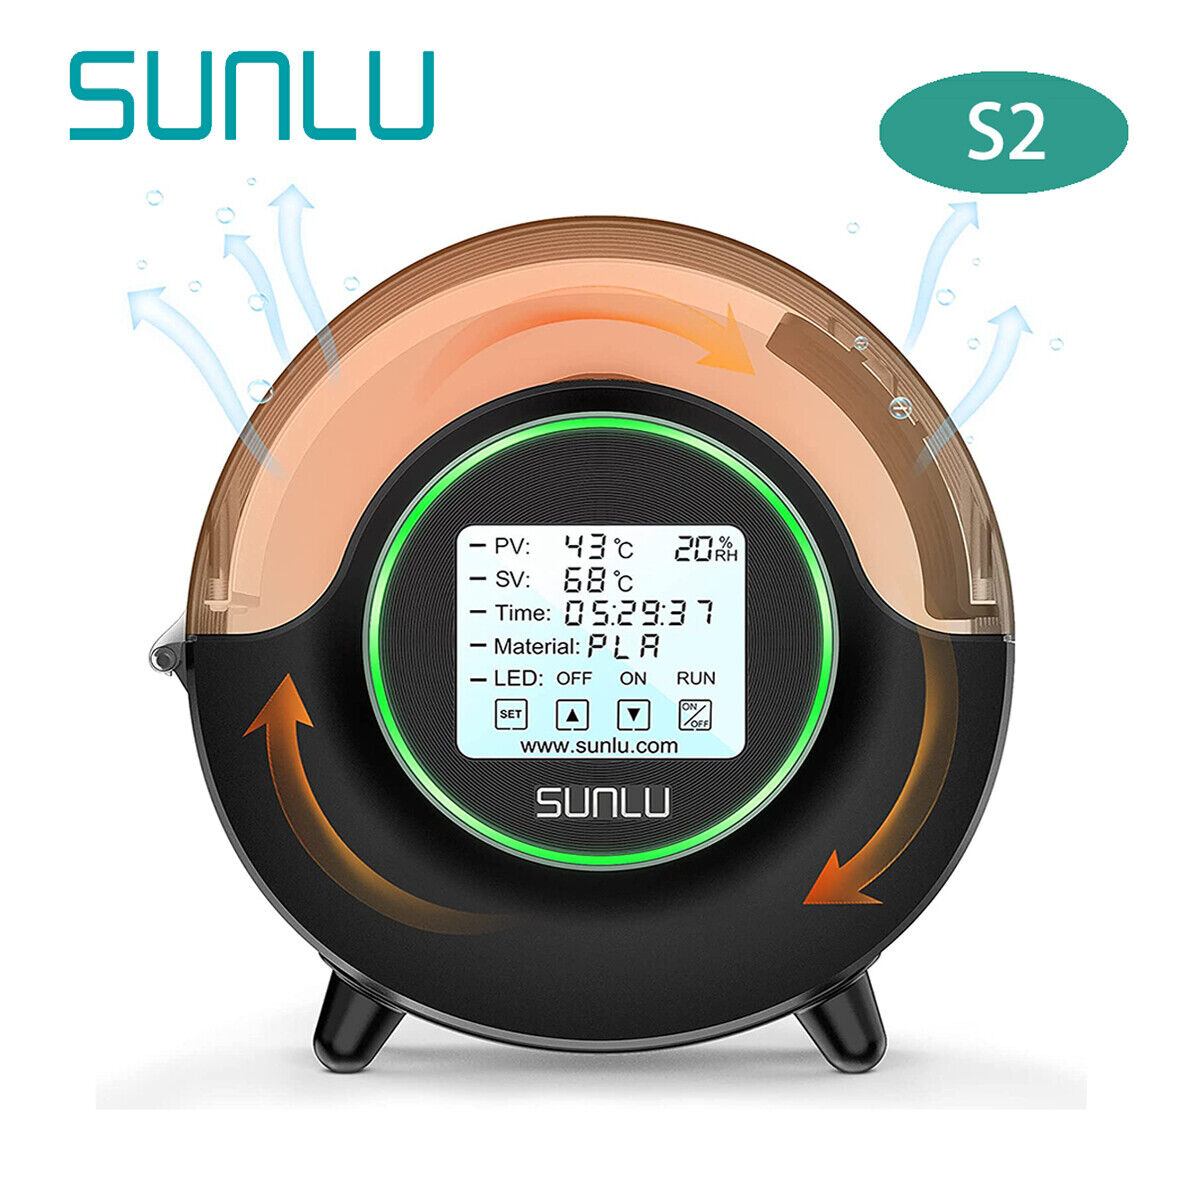 SUNLU Upgraded Dryer Box S2 With Fan,Black,360° Heating Around,Filament Holder